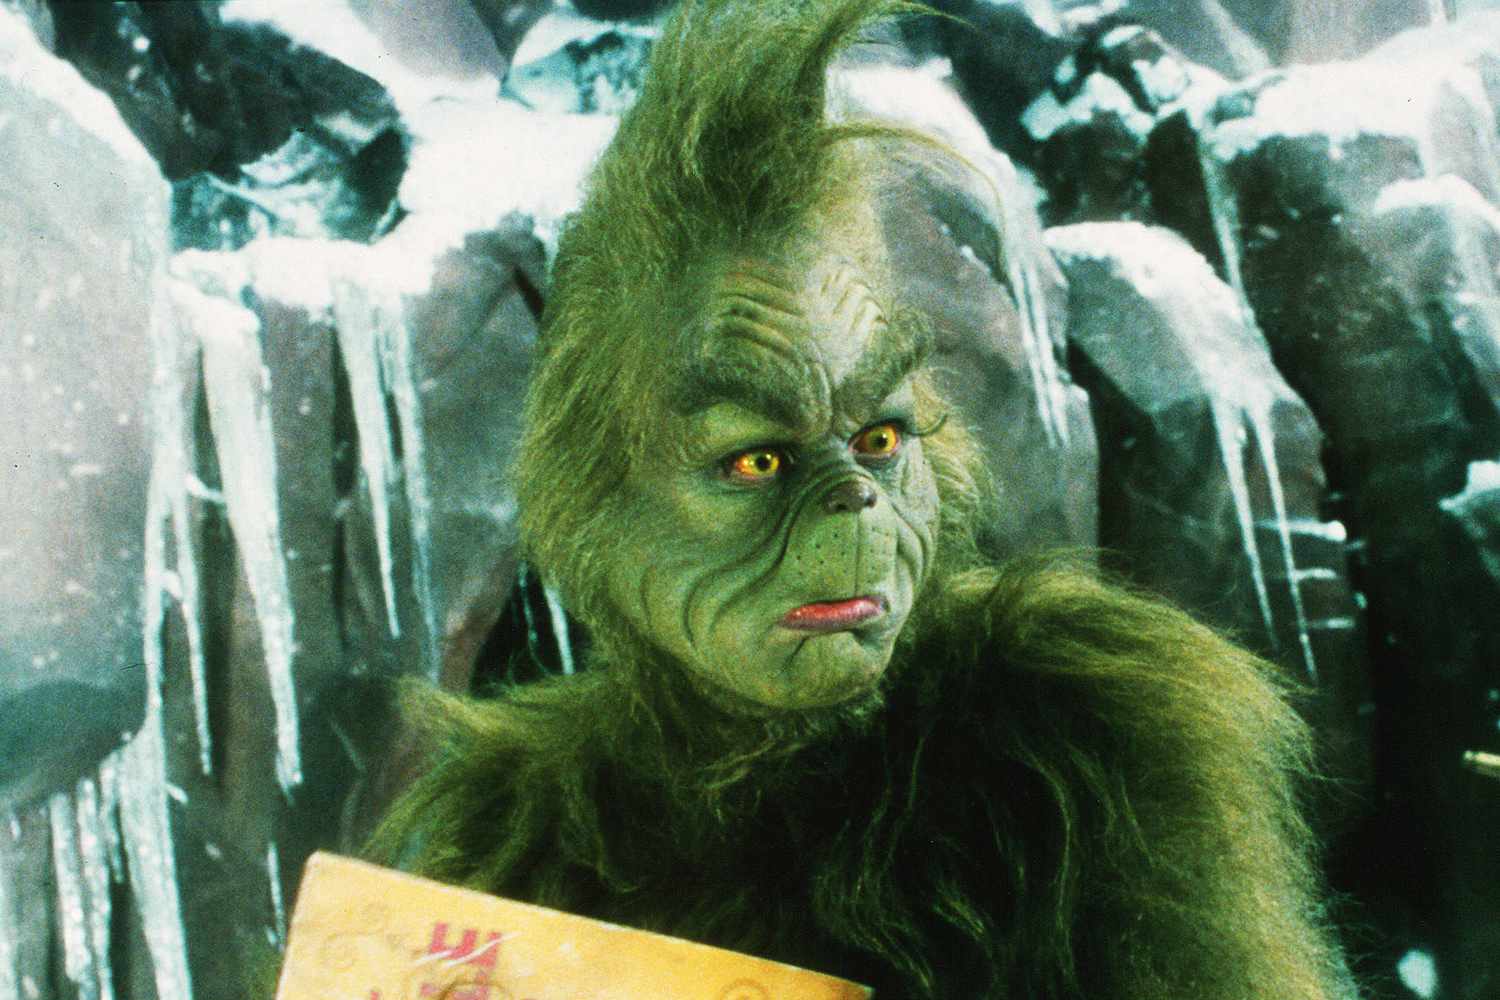 Jim Carrey as the Grinch in the live-action movie 'How the Grinch Stole Christmas.' 